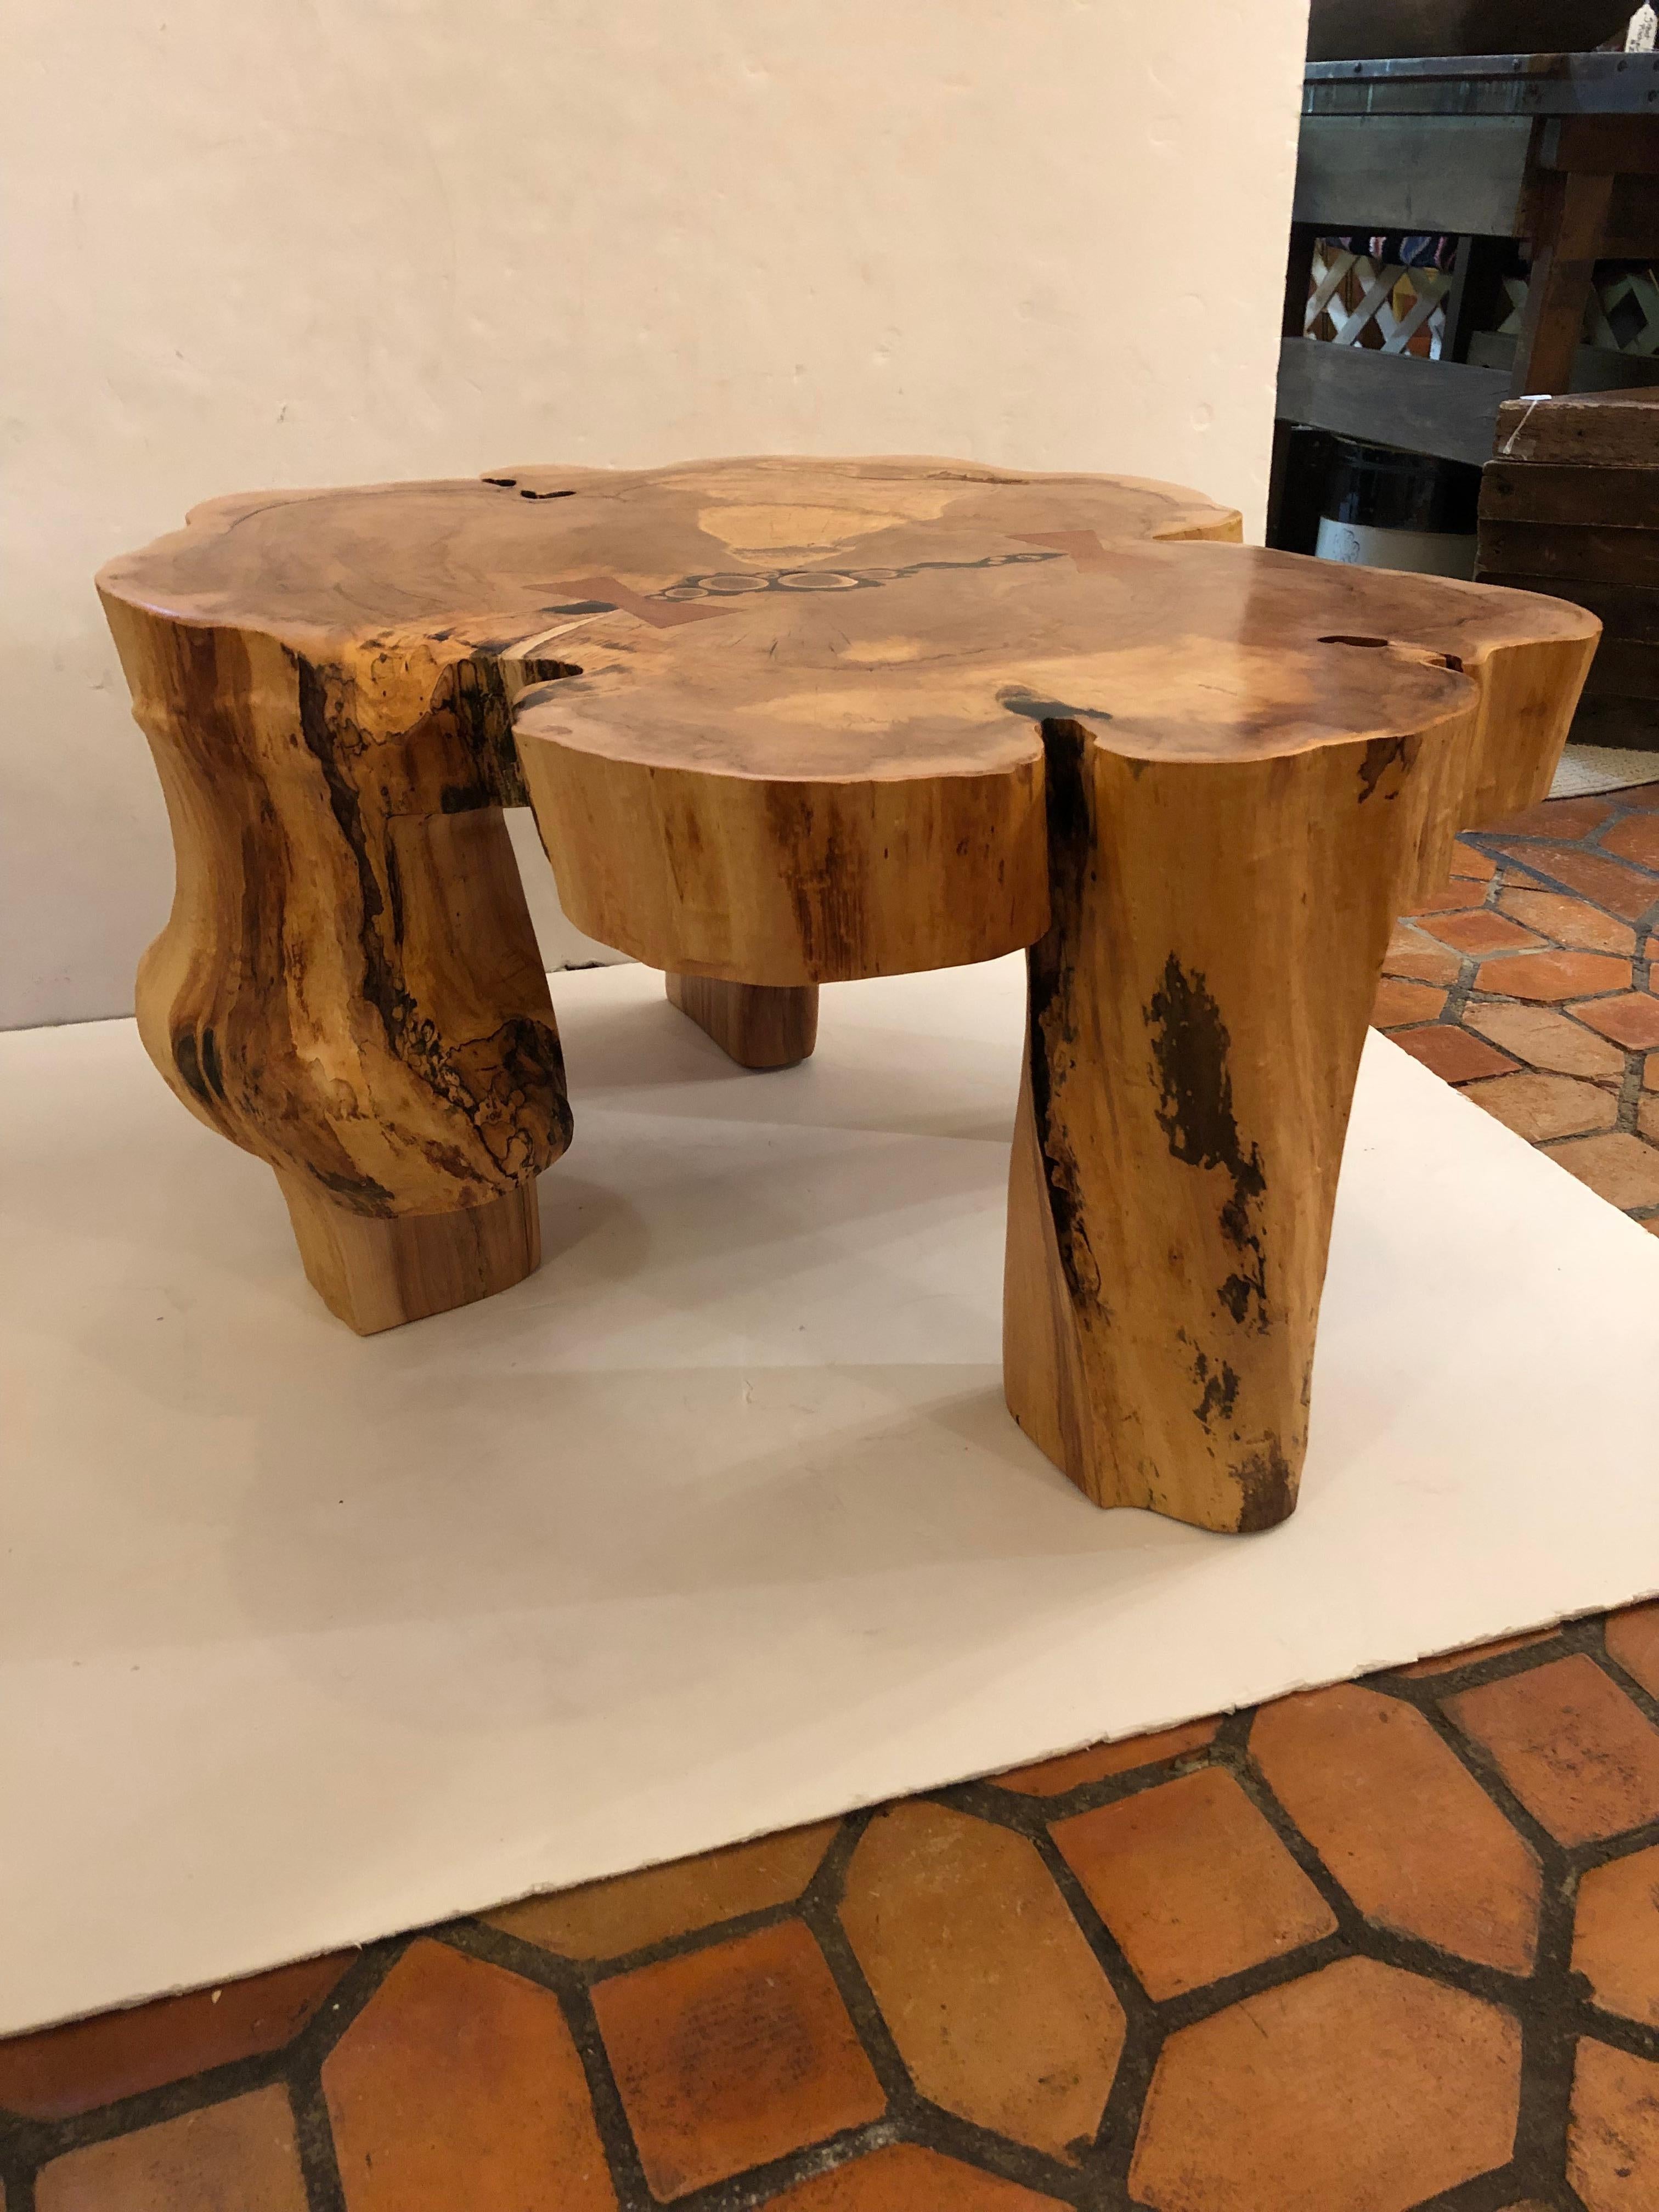 A hand made work of art by NJ wood worker John Braun. This organic modern amoeba shaped coffee table is made from the salvaged base of a maple tree from the artist's own backyard. The lengthy process includes months of drying the wood and expert